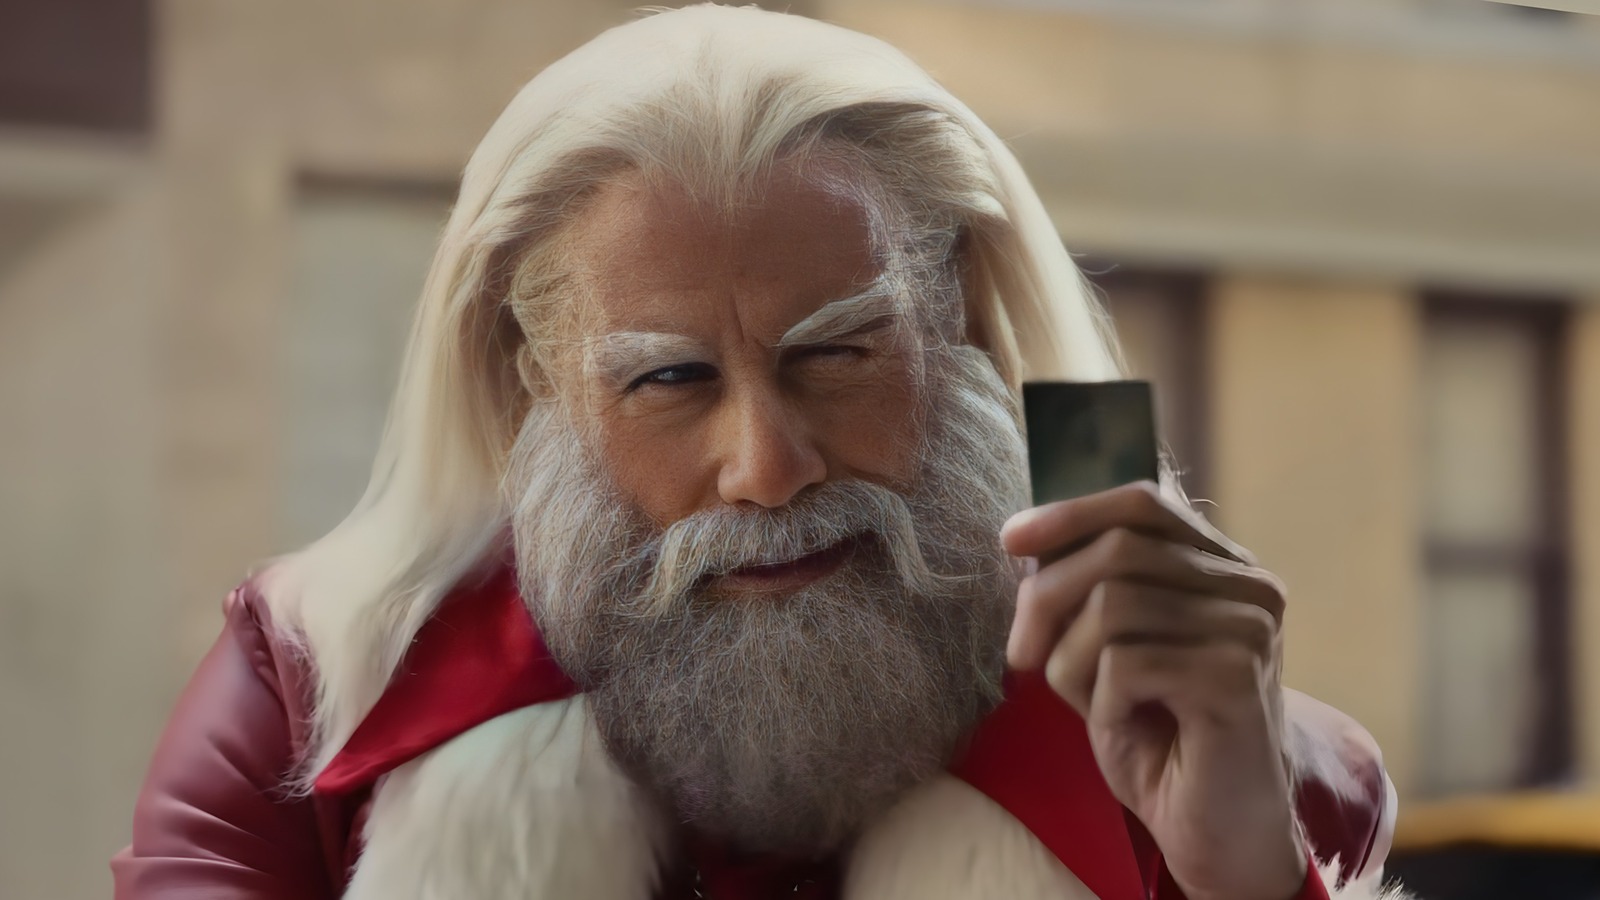 Who Plays Santa In The Capital One Commercial?